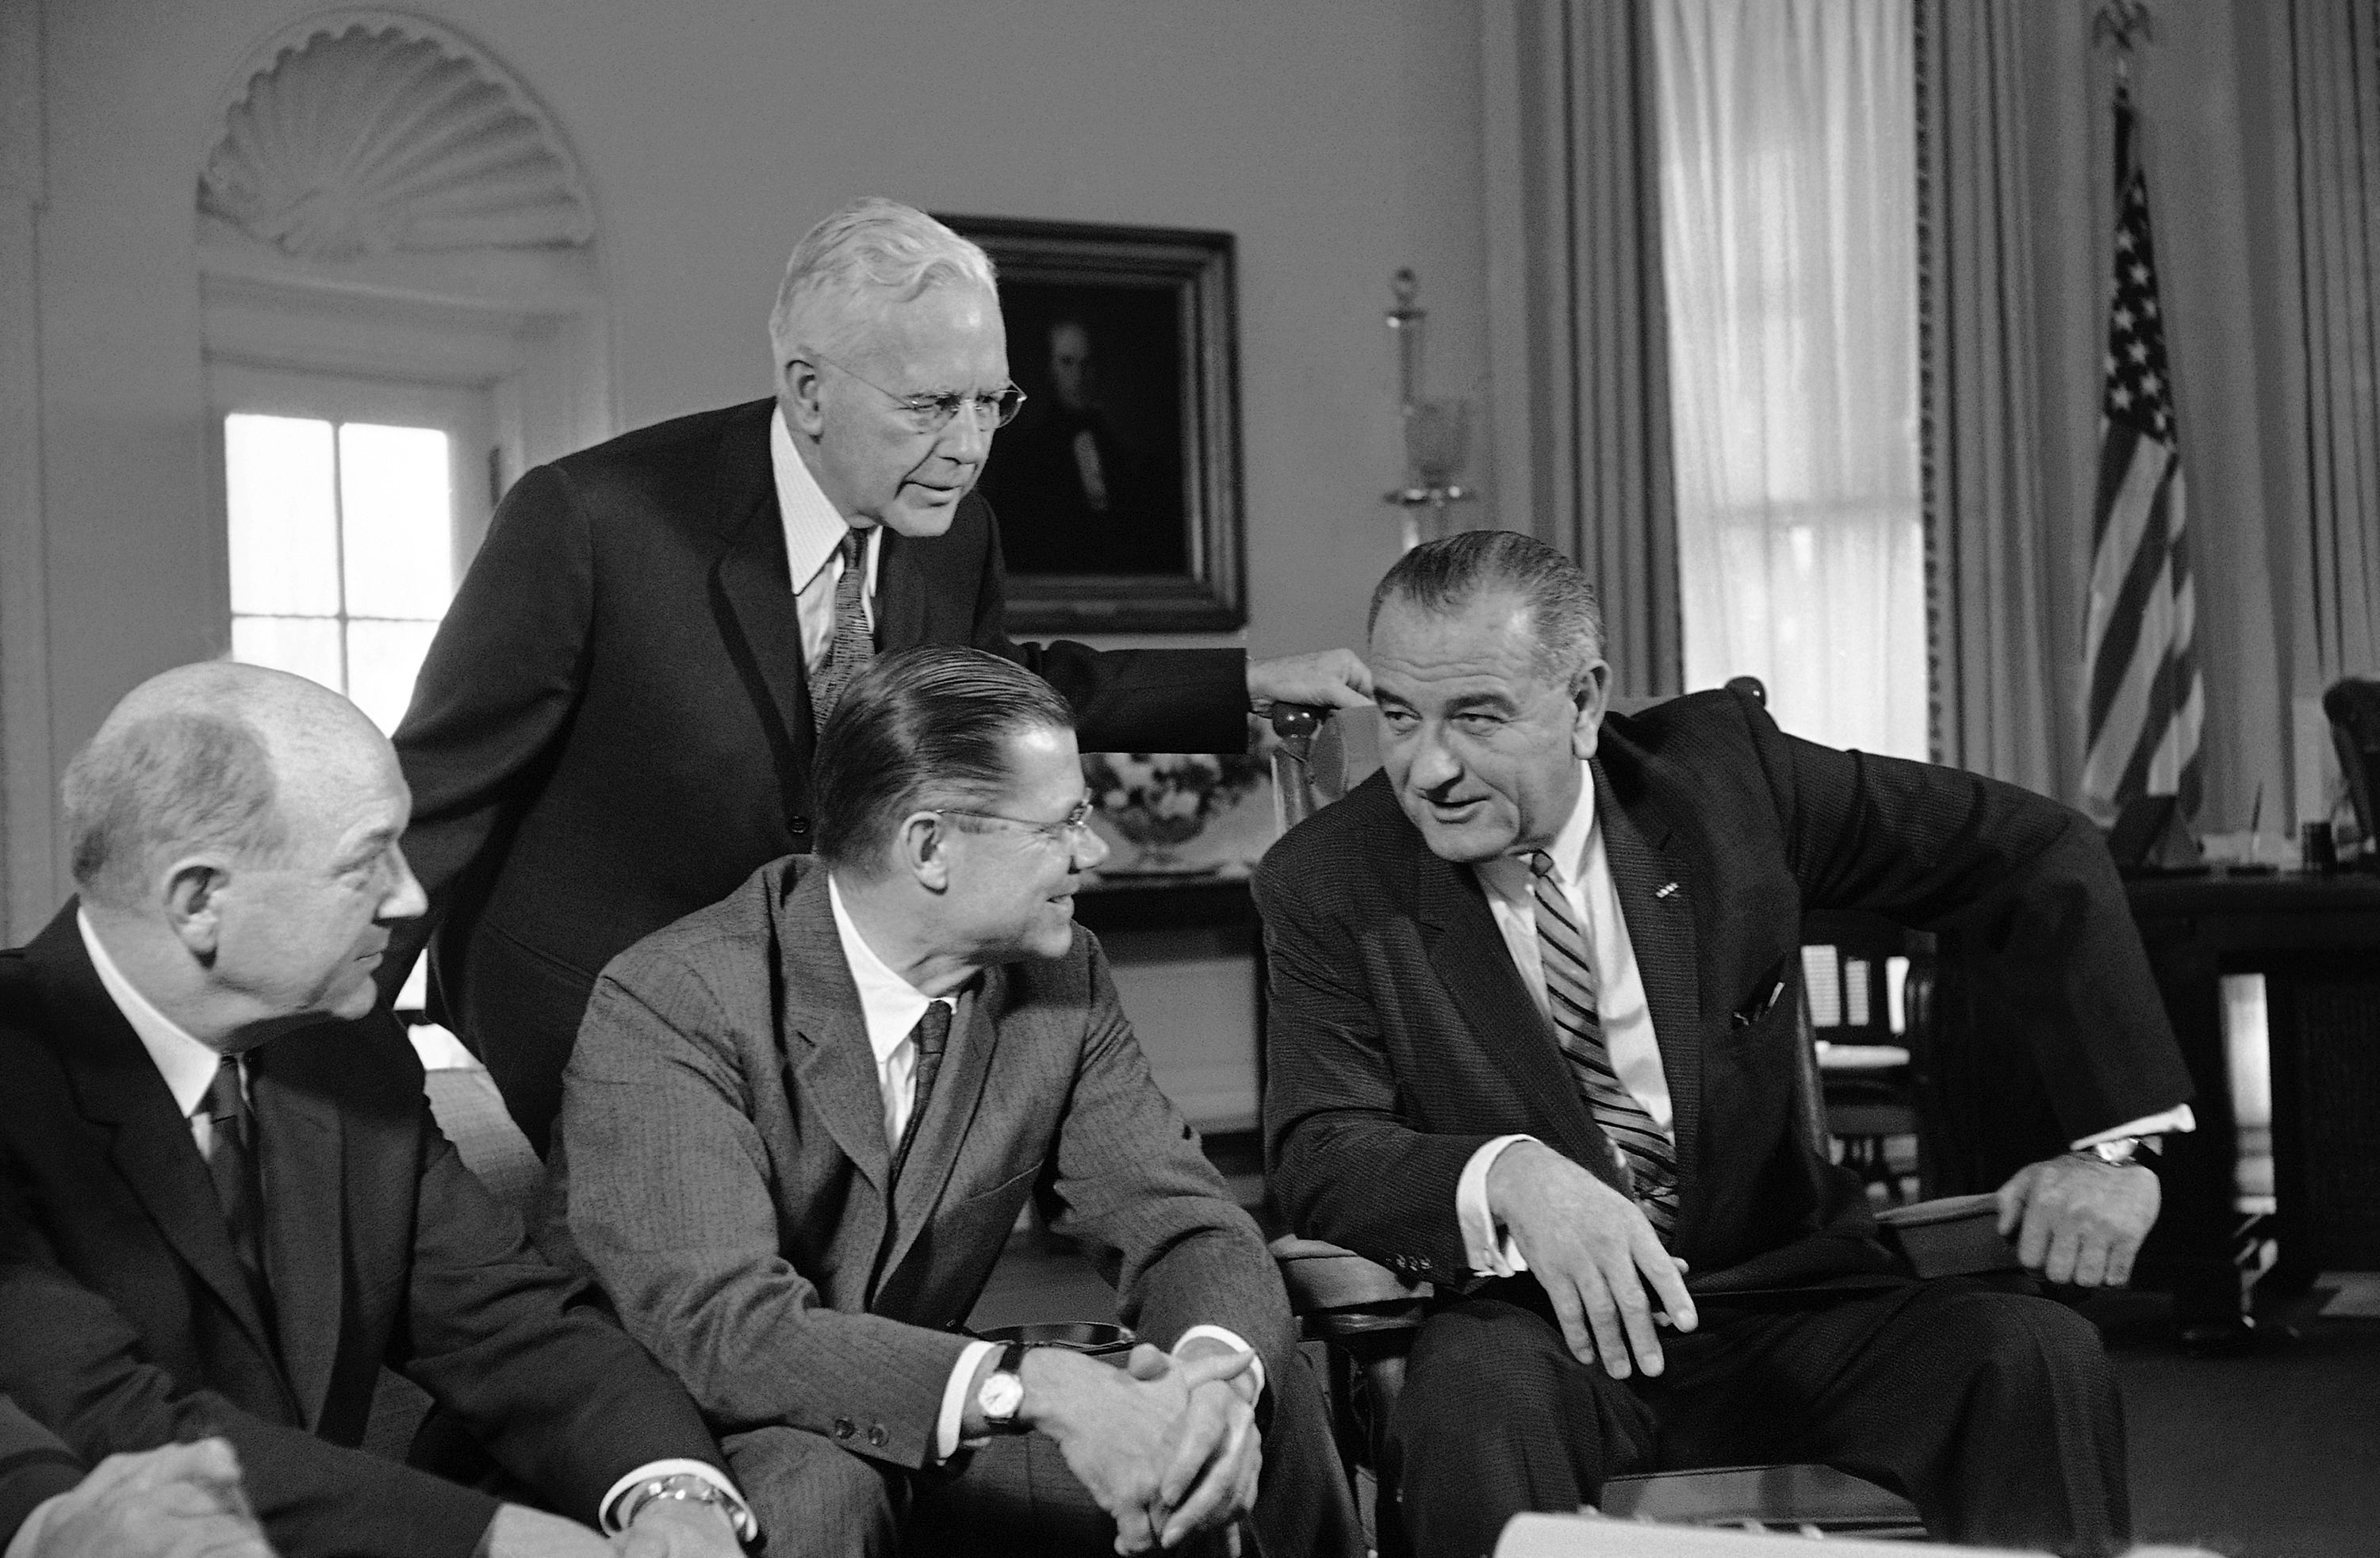 President Lyndon Johnson, right, talks with Secretary of Defense Robert McNamara, center sitting, after McNamara returned from a fact-finding trip to South Vietnam, at the White House in Washington, March 13, 1964. (AP Photo)